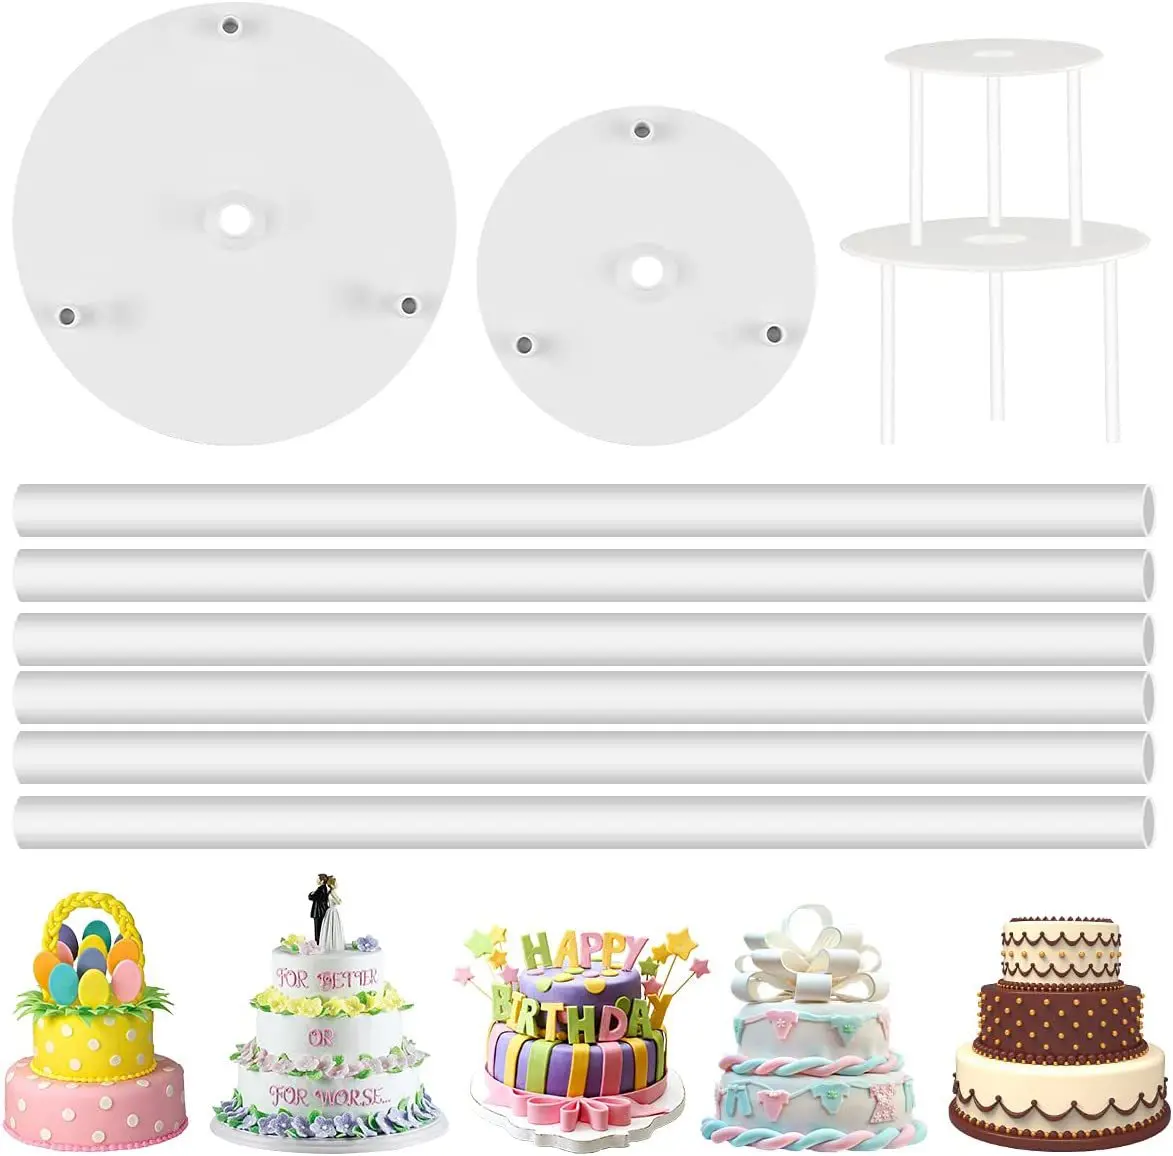 Cake Tier Support Cake Dowel Rods Set 3pcs Sticks With 1pc Cake Separator  Plate For Tiered Cake Construction Stacking - Cake Tools - AliExpress